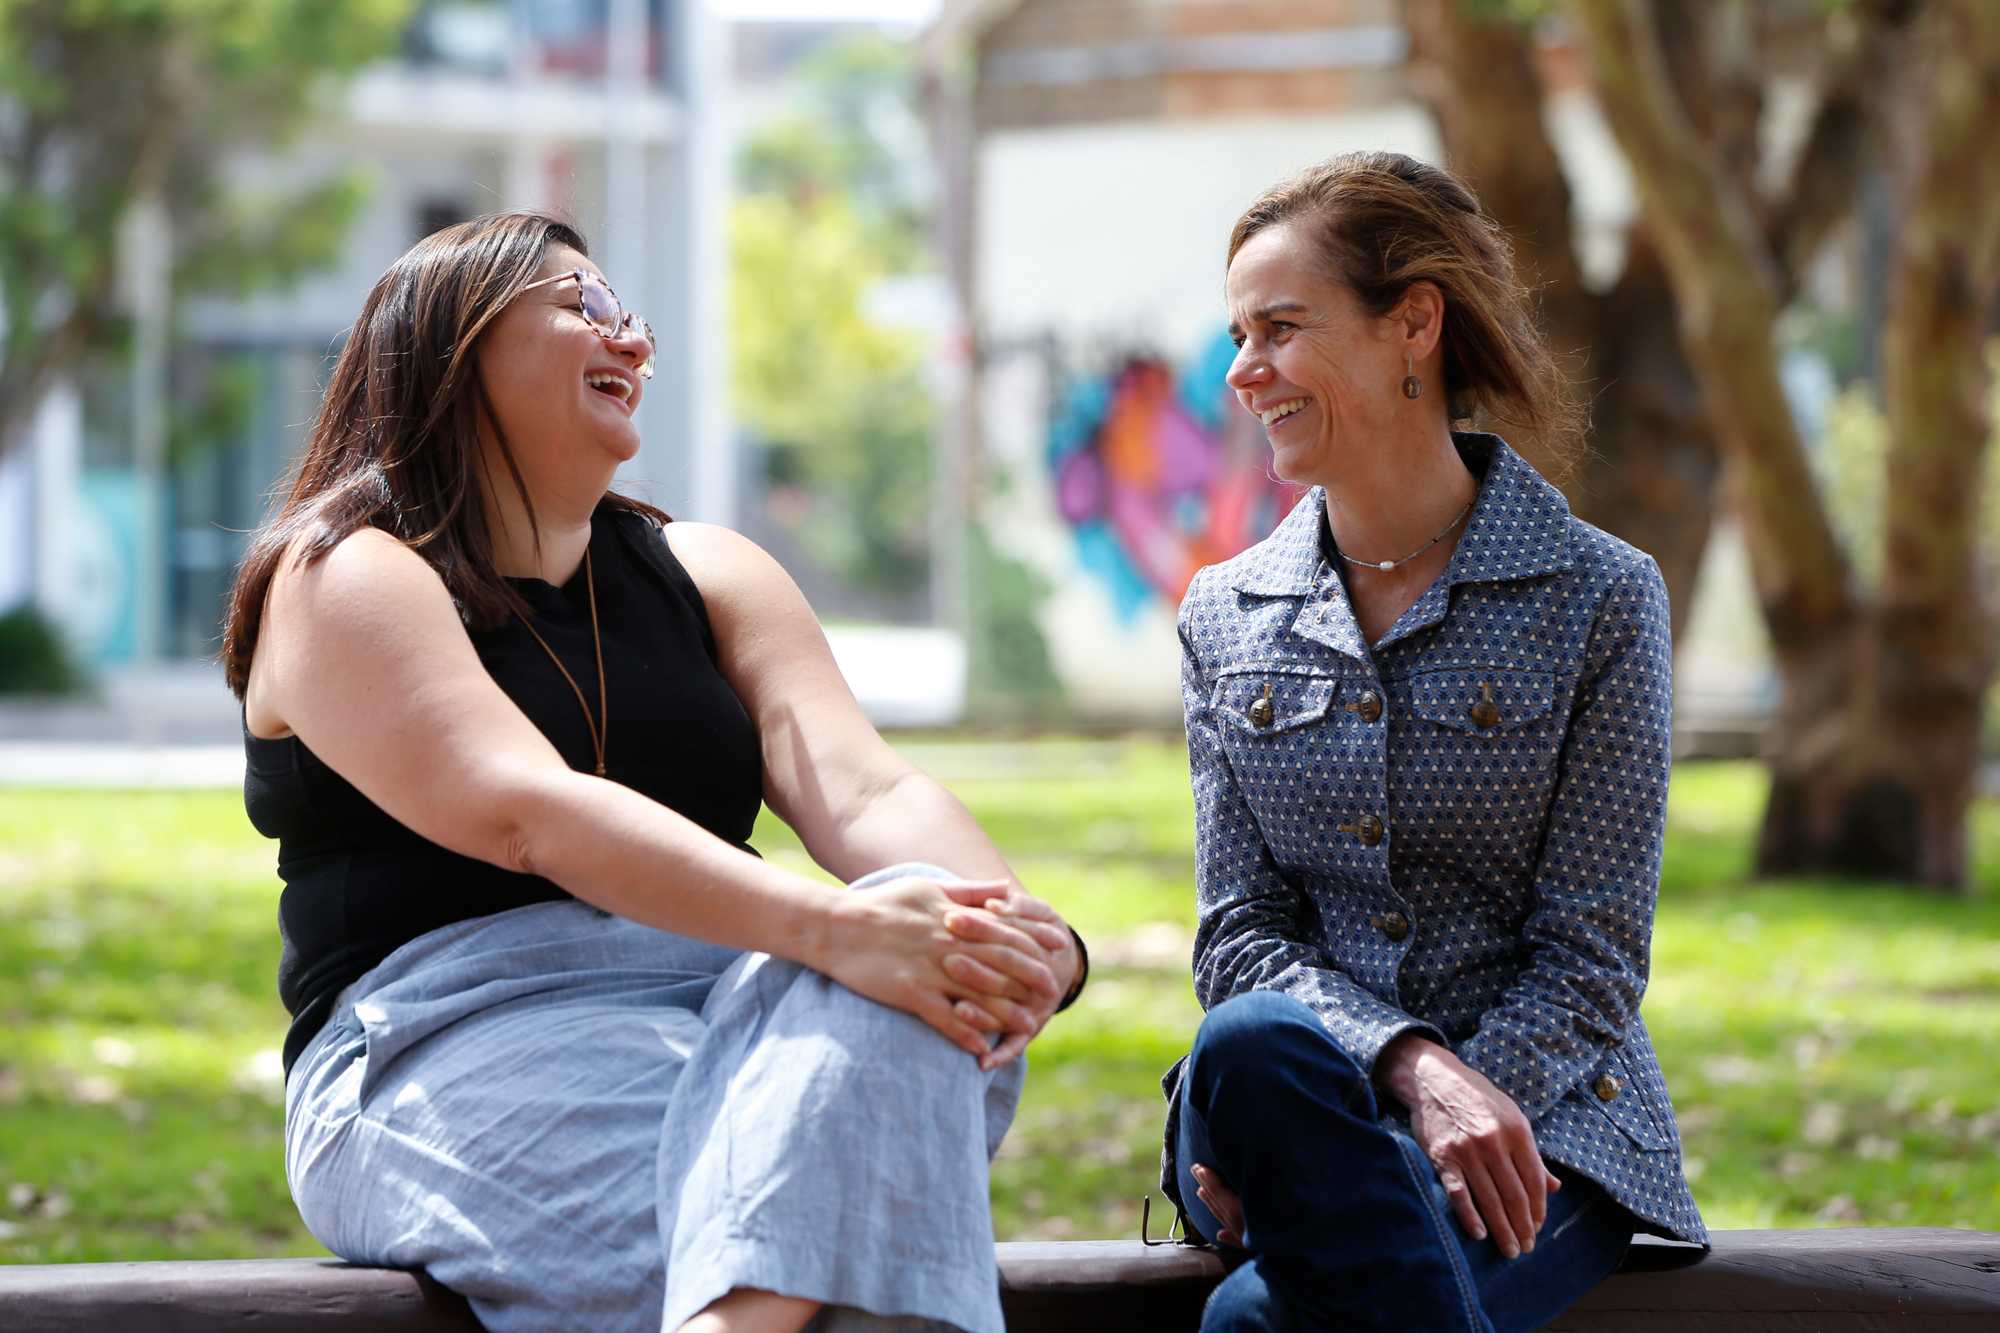 Two woman smiling and connecting in a park